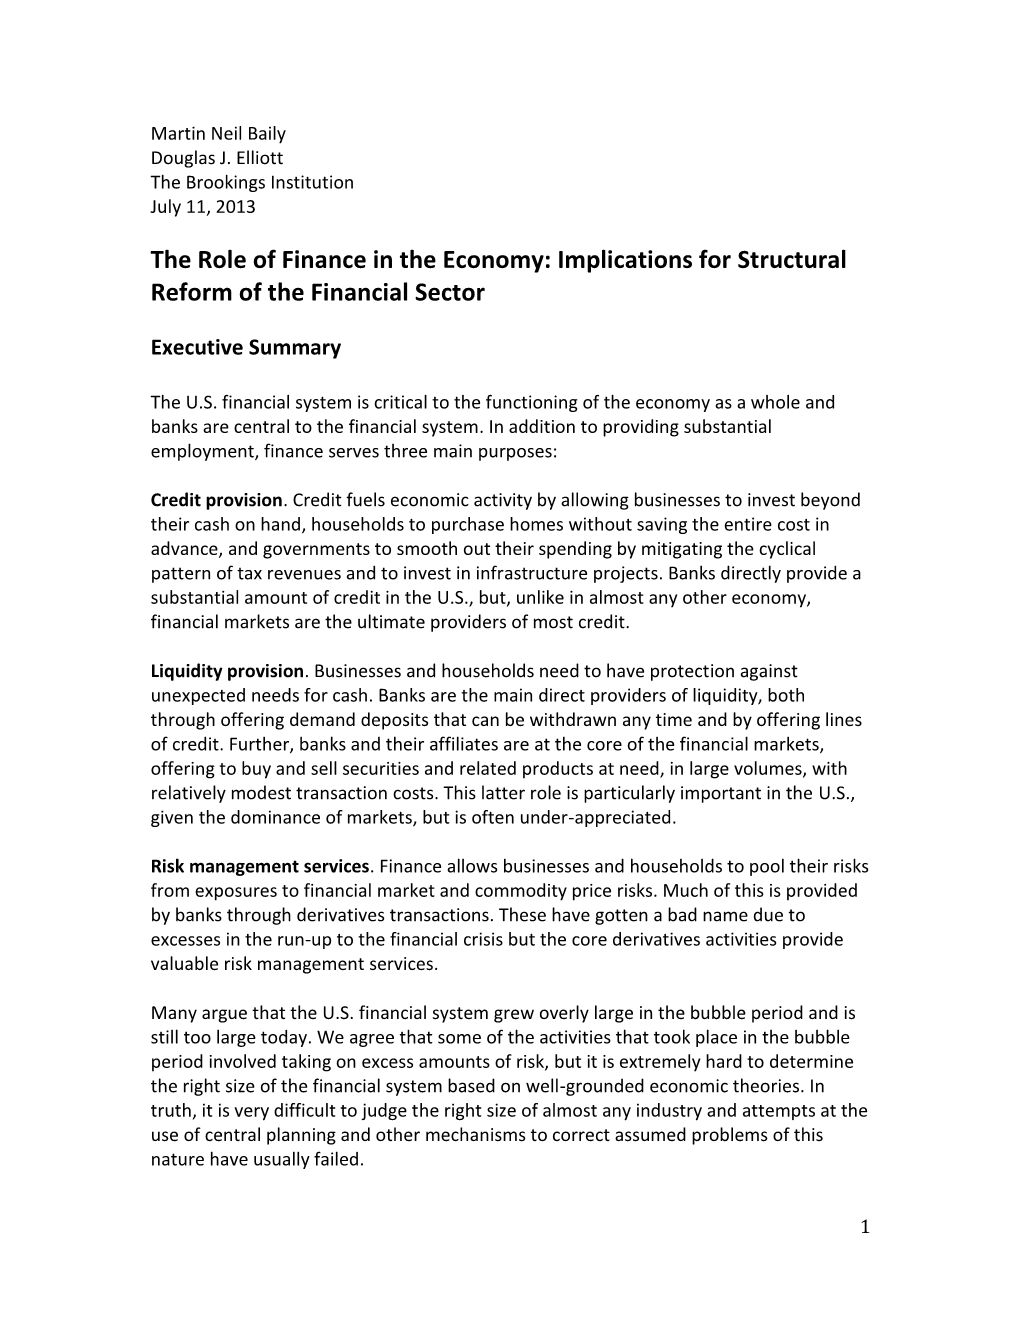 The Role of Finance in the Economy: Implications for Structural Reform of the Financial Sector